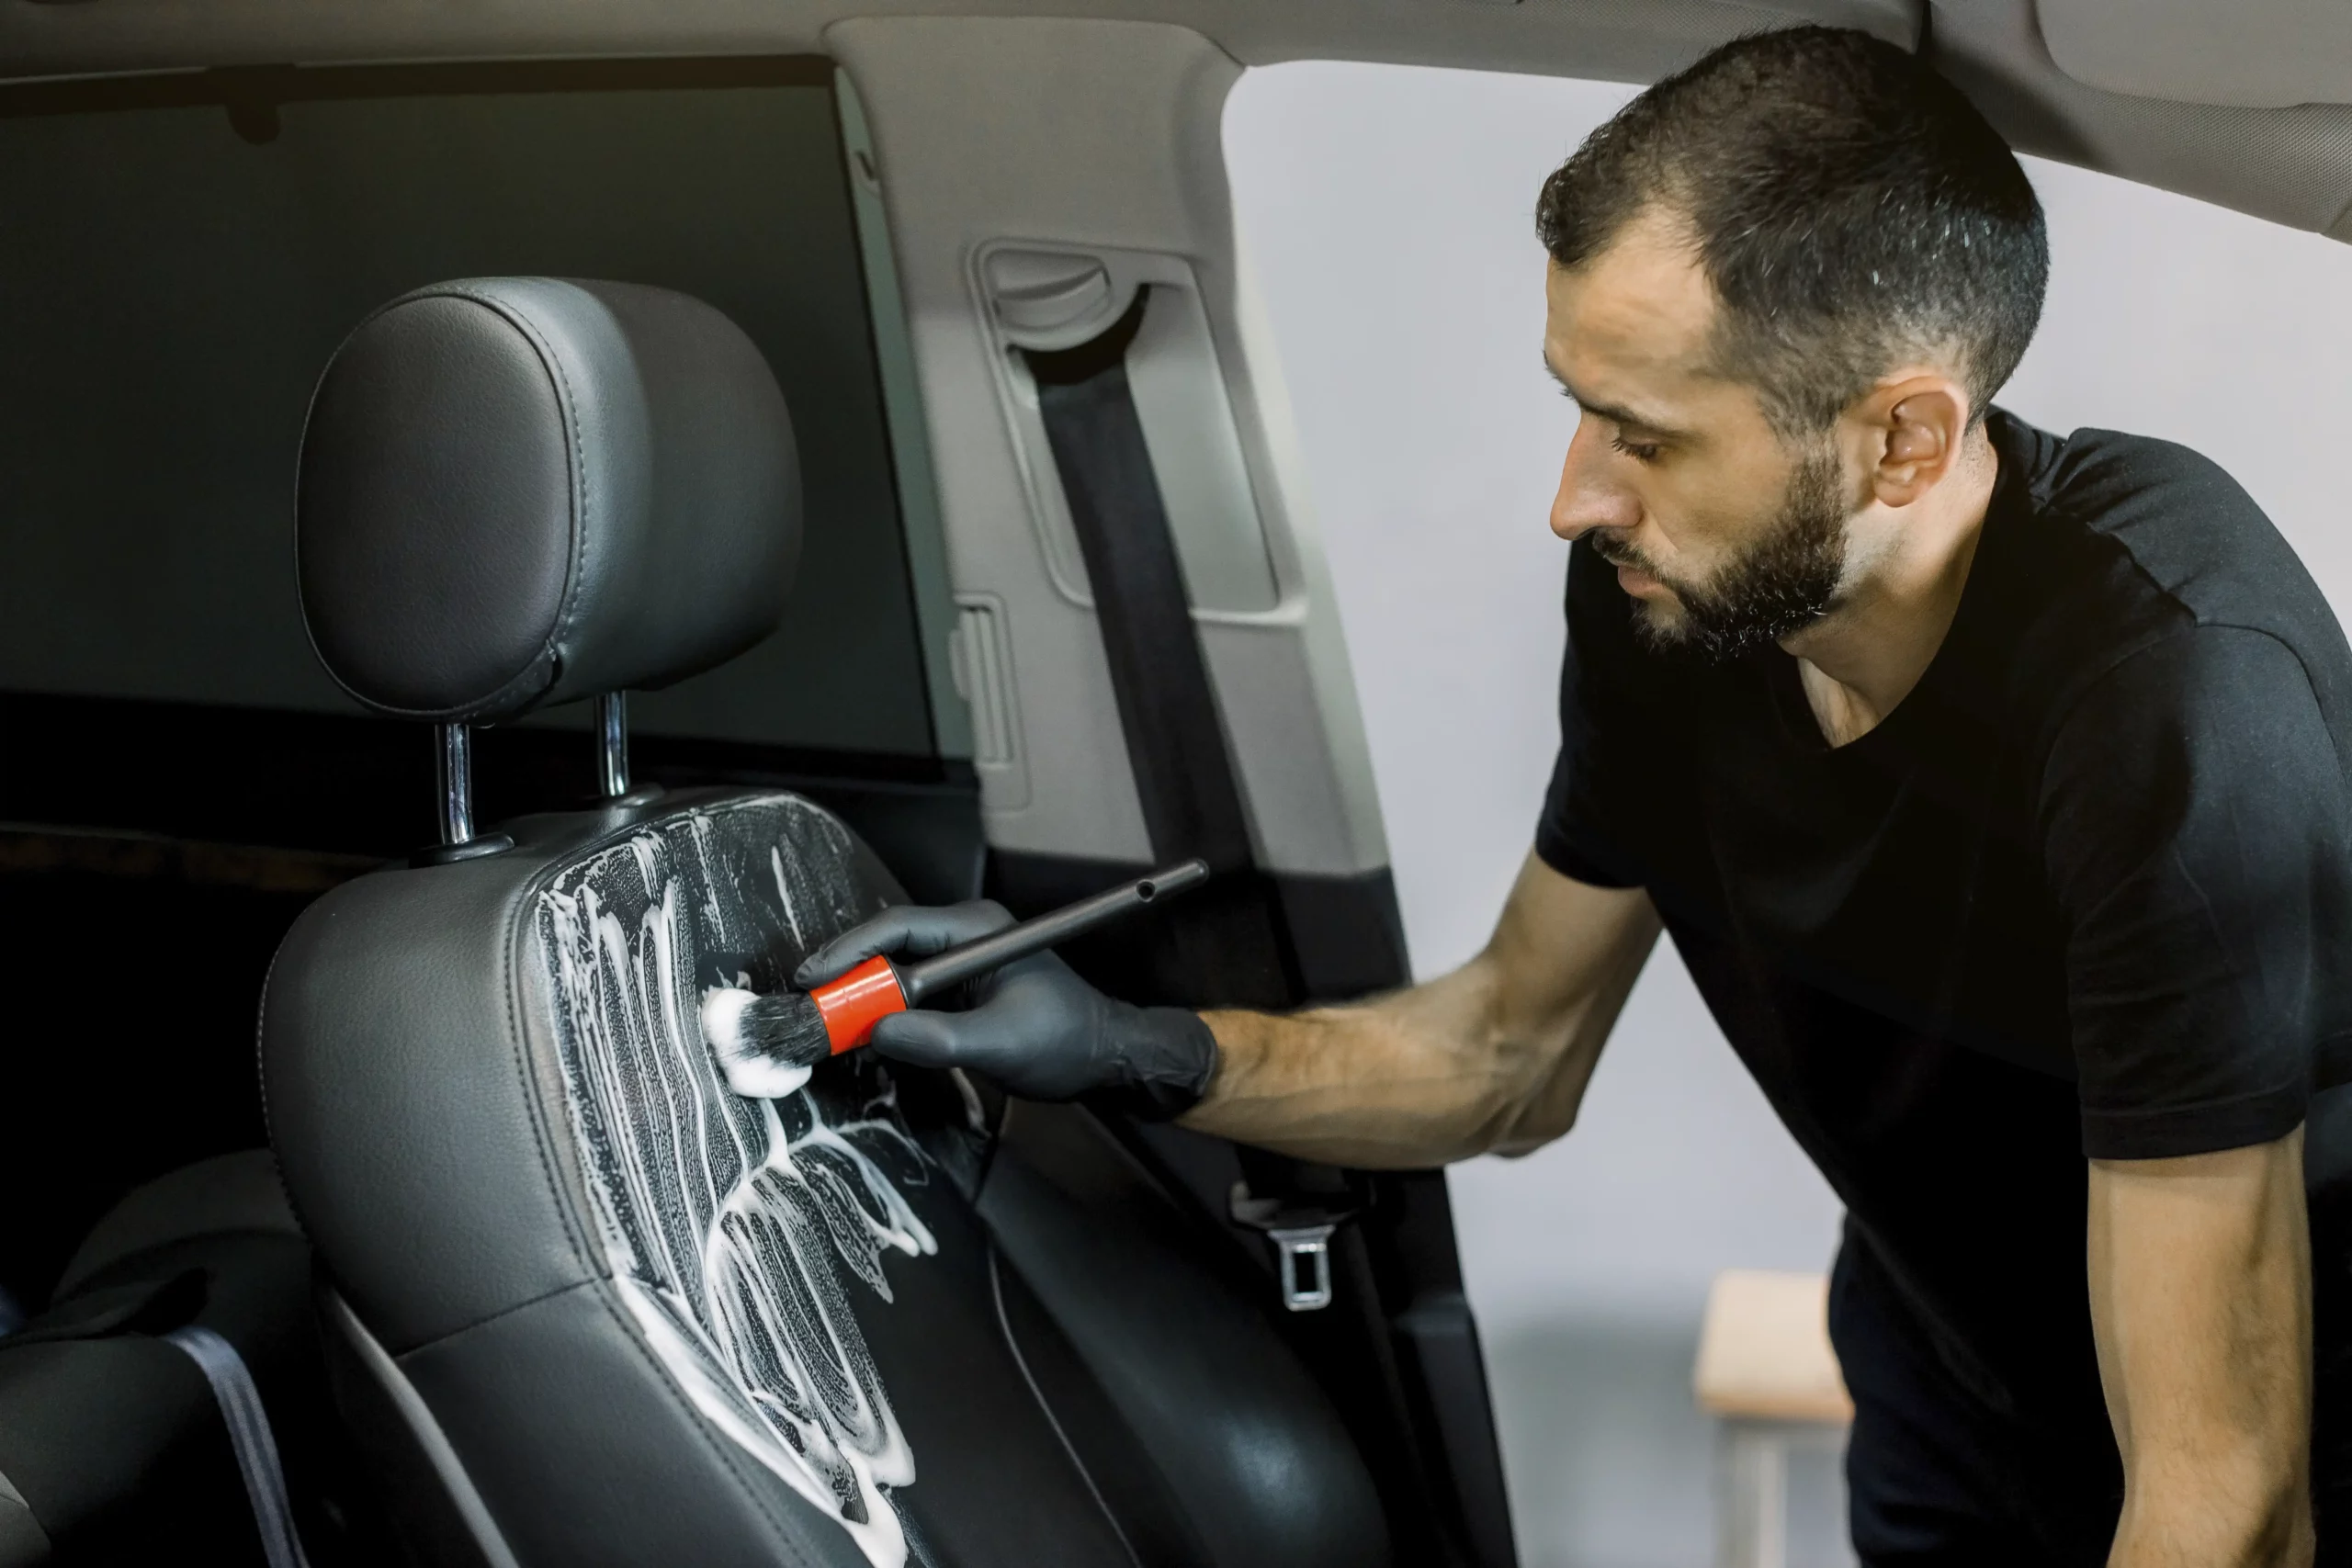 The technician is cleaning a black leather car seat with a detailing brush.